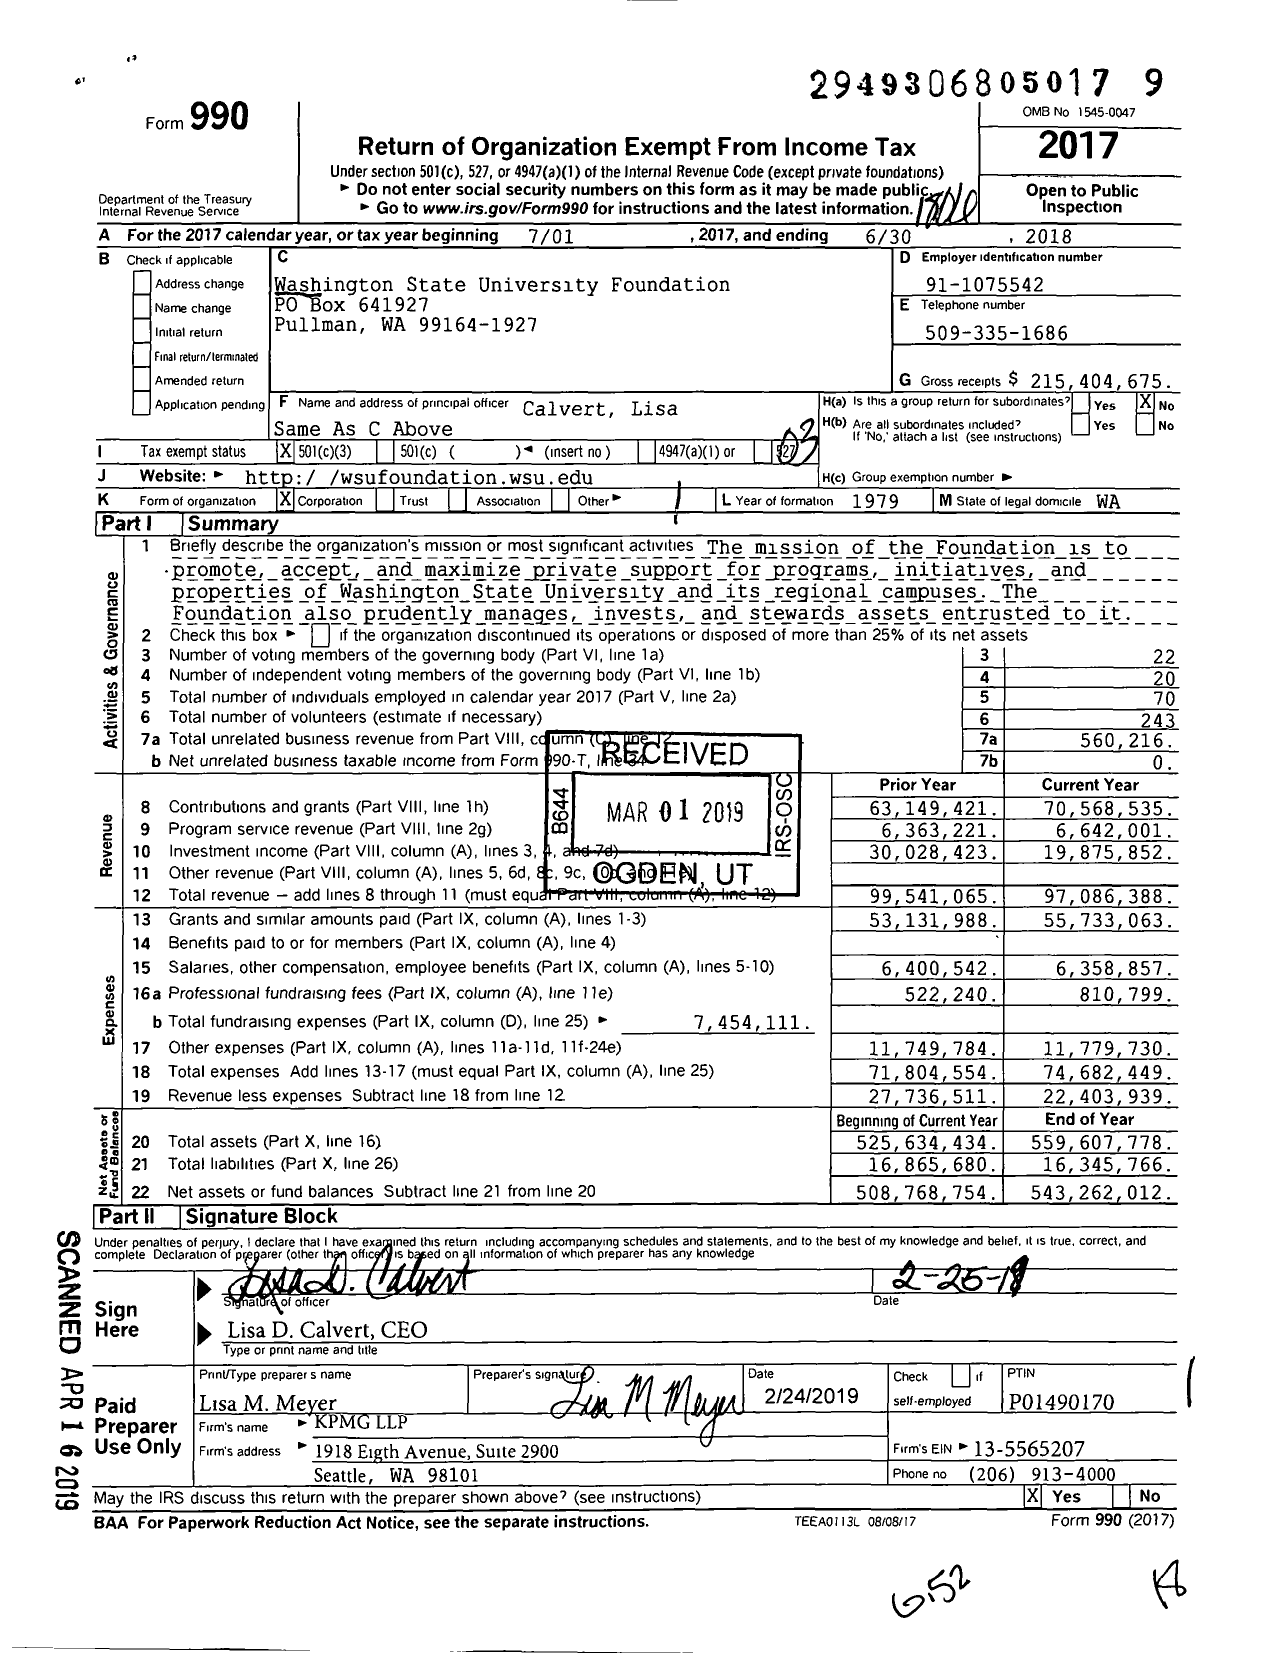 Image of first page of 2017 Form 990 for Washington State University Foundation (WSU)